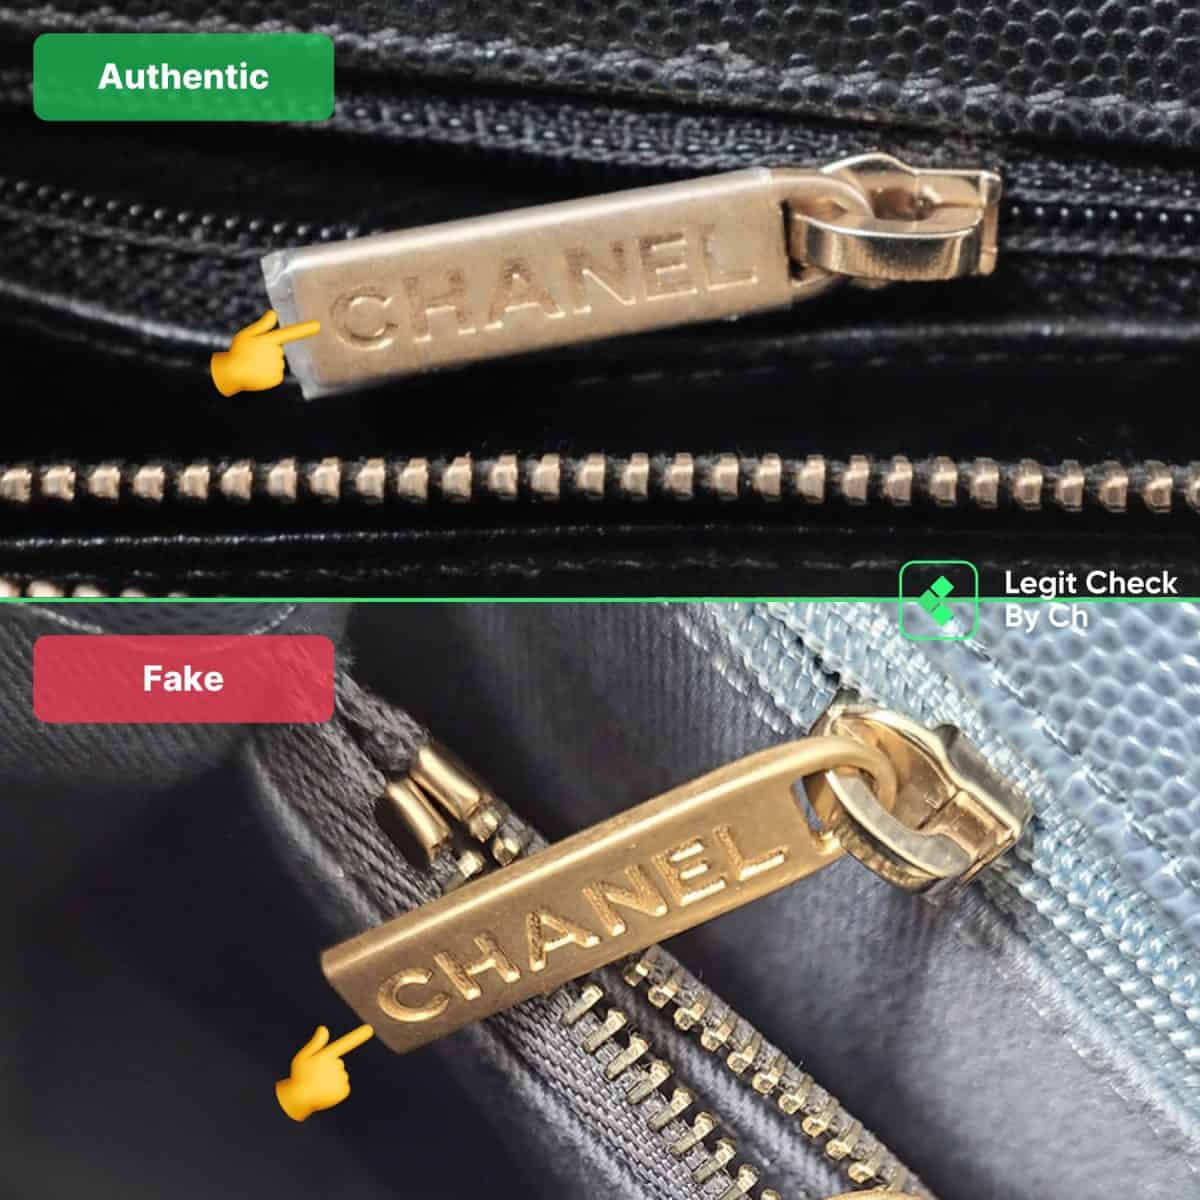 Comparison of the authentic and fake Chanel bags for their zippers